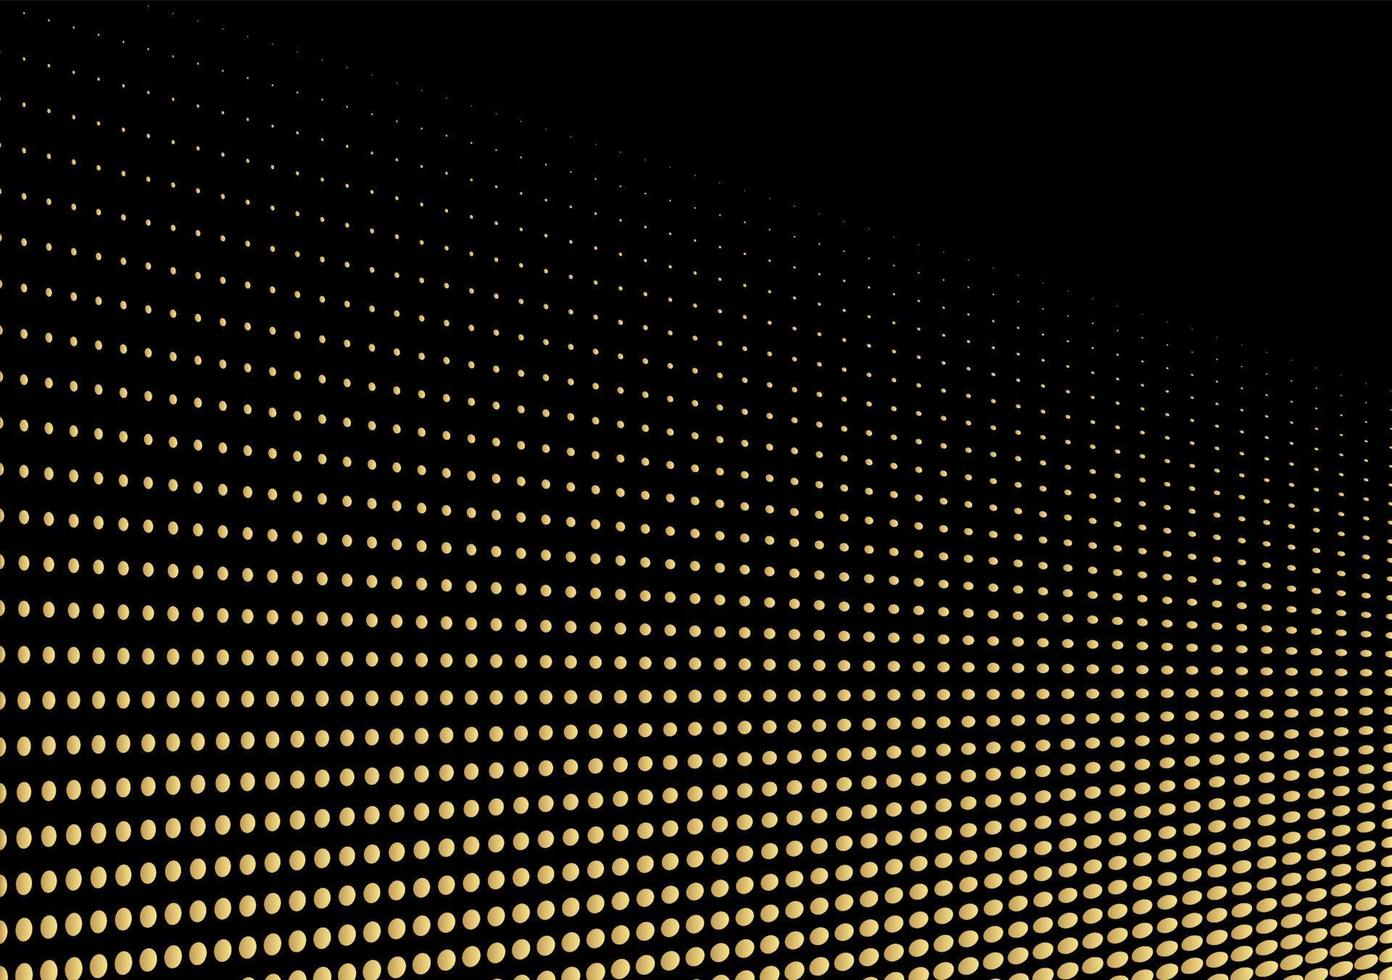 Abstract halftone gold dotted background. Futuristic grunge pattern, dot, wave. Vector modern optical pop art texture for posters, sites, business cards, cover, labels mock-up, vintage layout